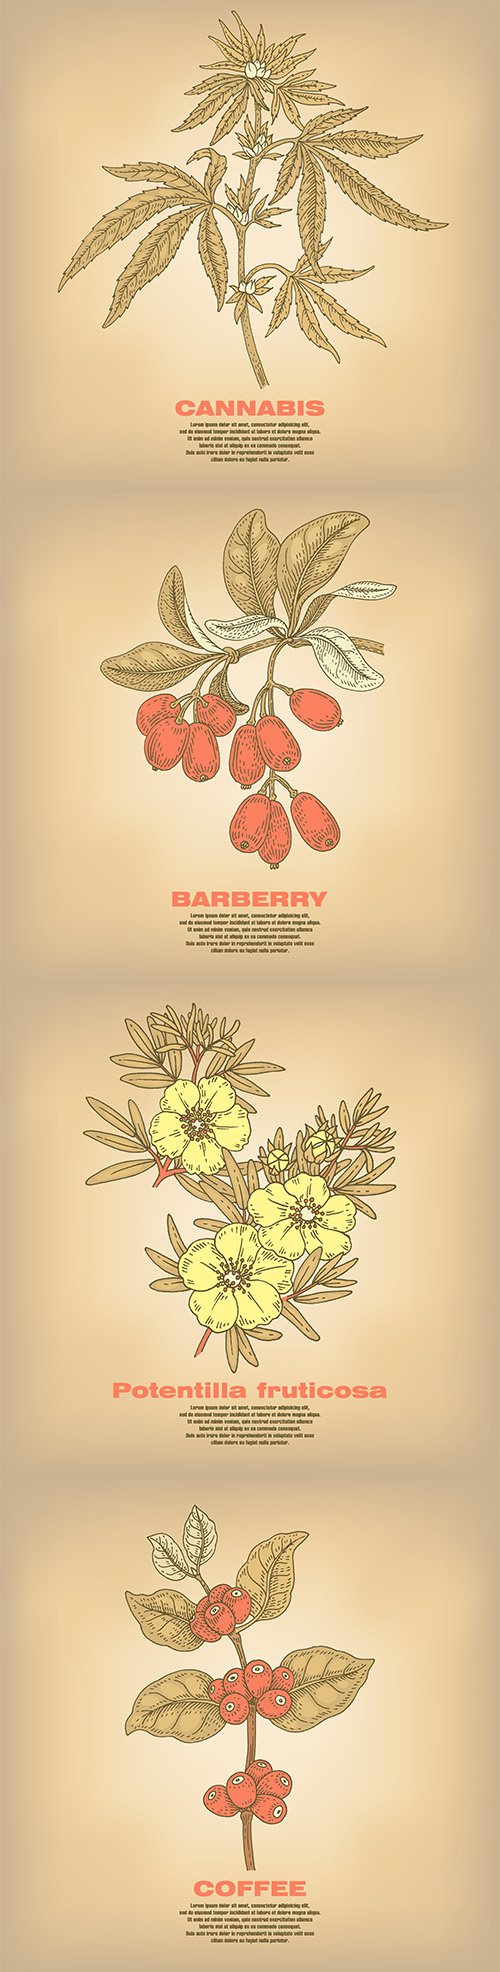 Illustrations of Medical Herbs